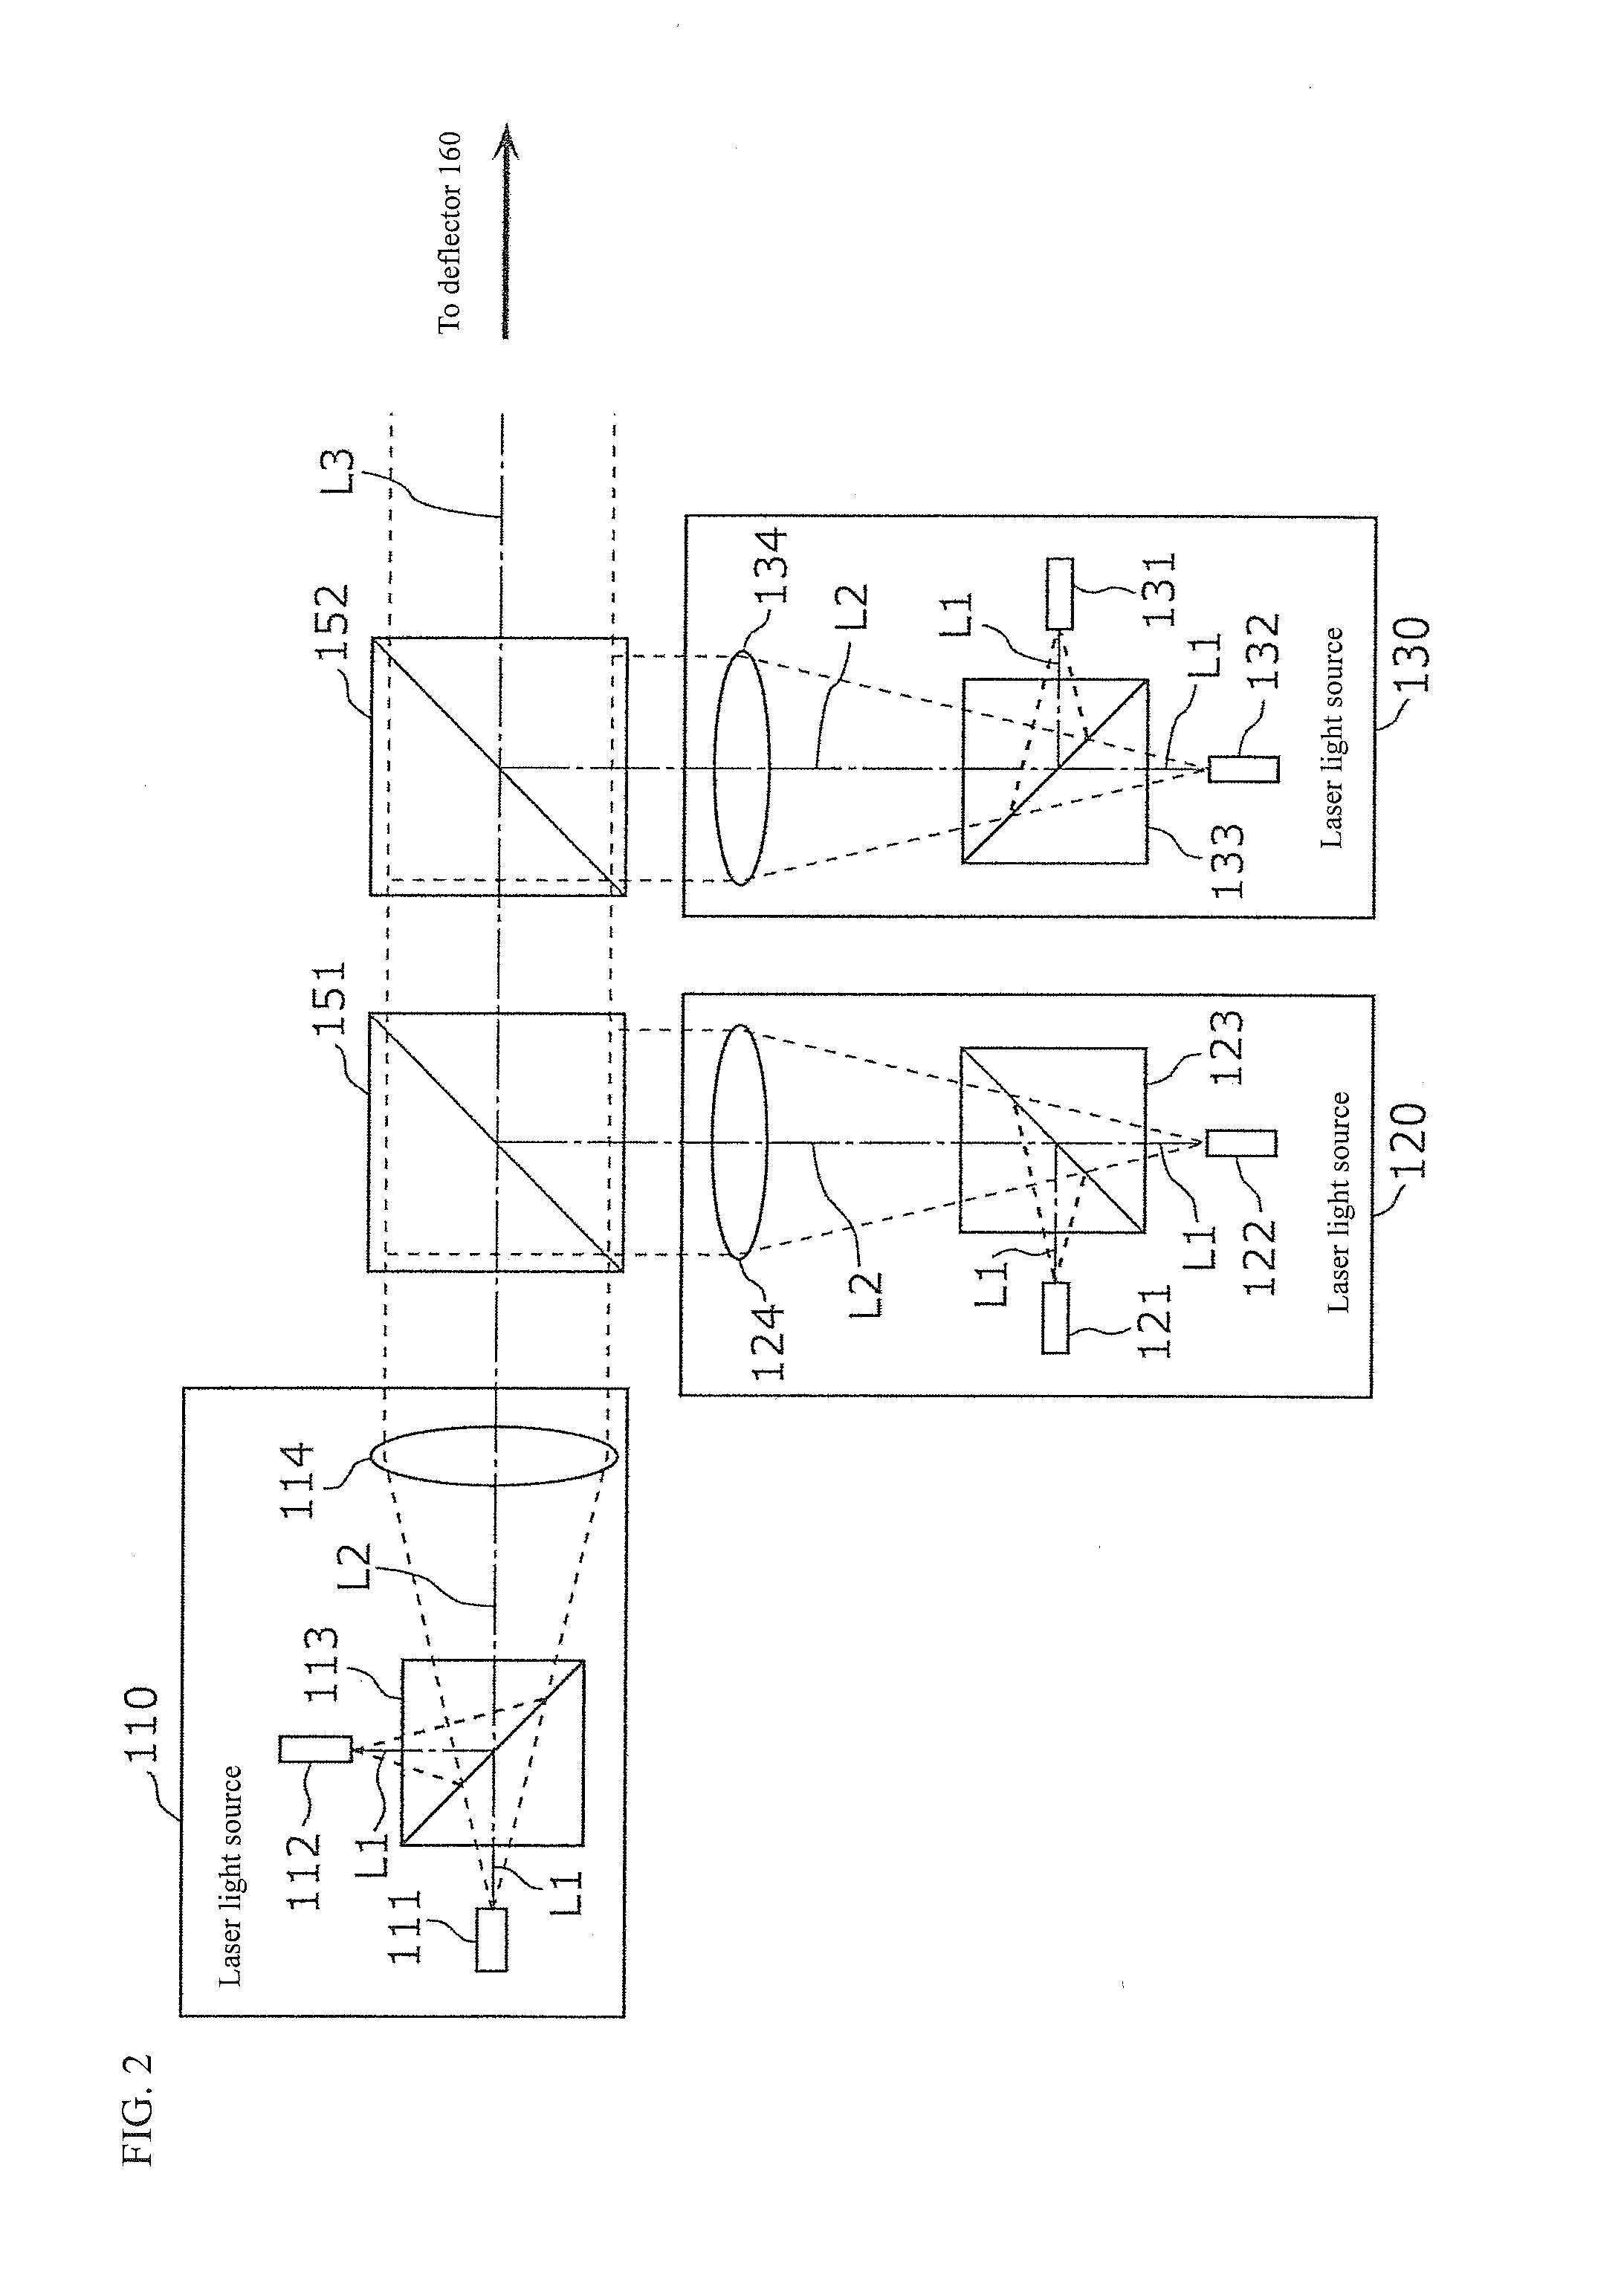 Image projection apparatus